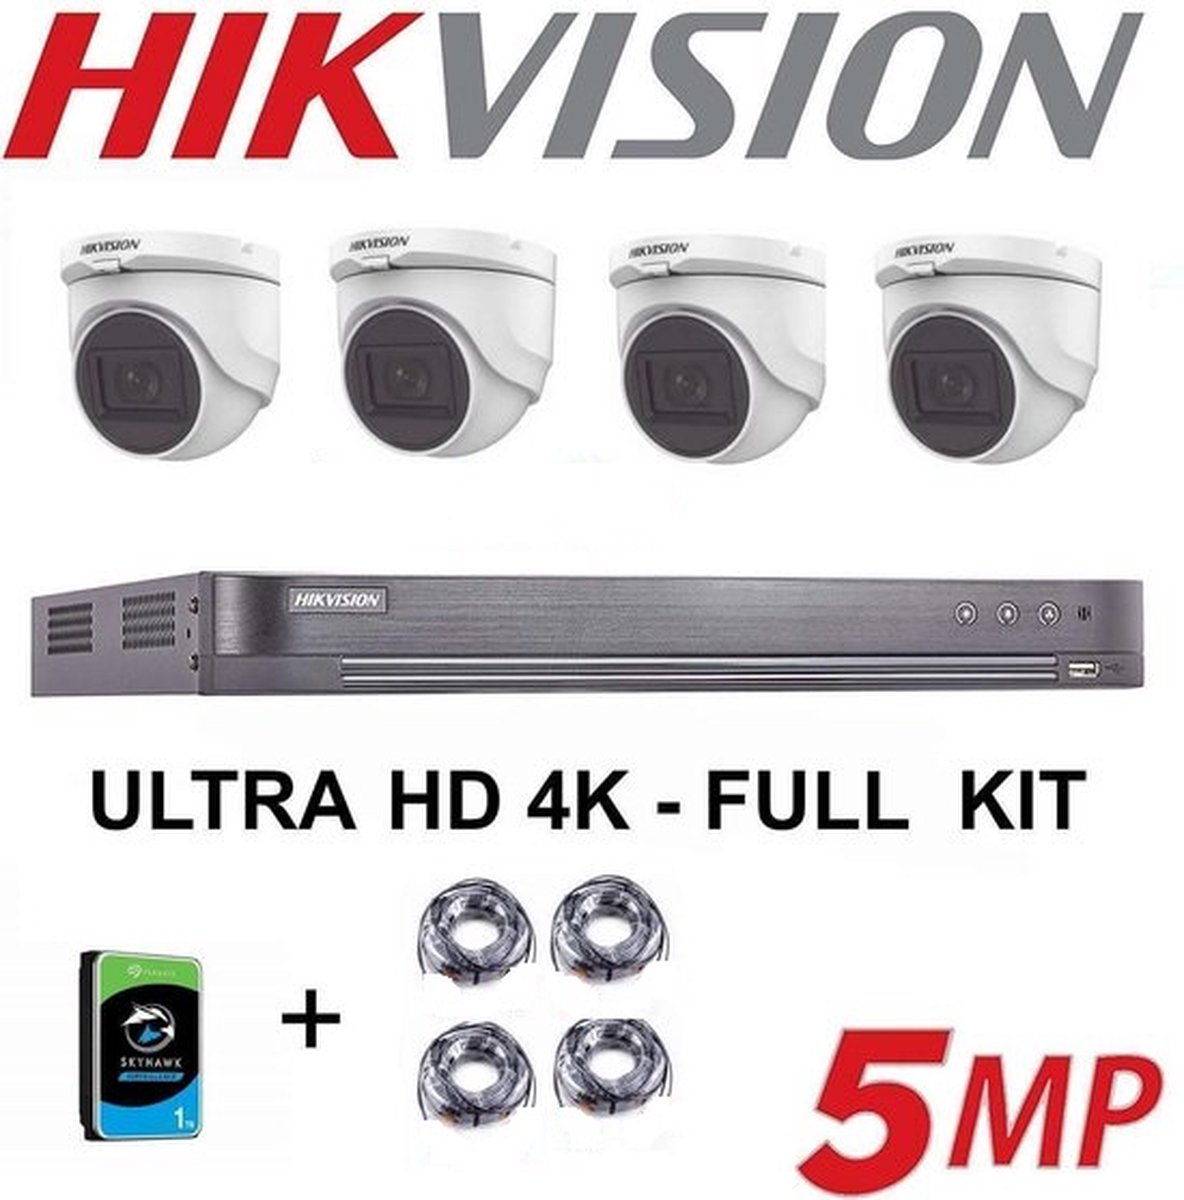 Kit HIKVISION 5 MP AUDIO DVR 4 CH HD - 4x Camera Turret 5MP 2.8mm - 2Tb HDD PROMOTIE